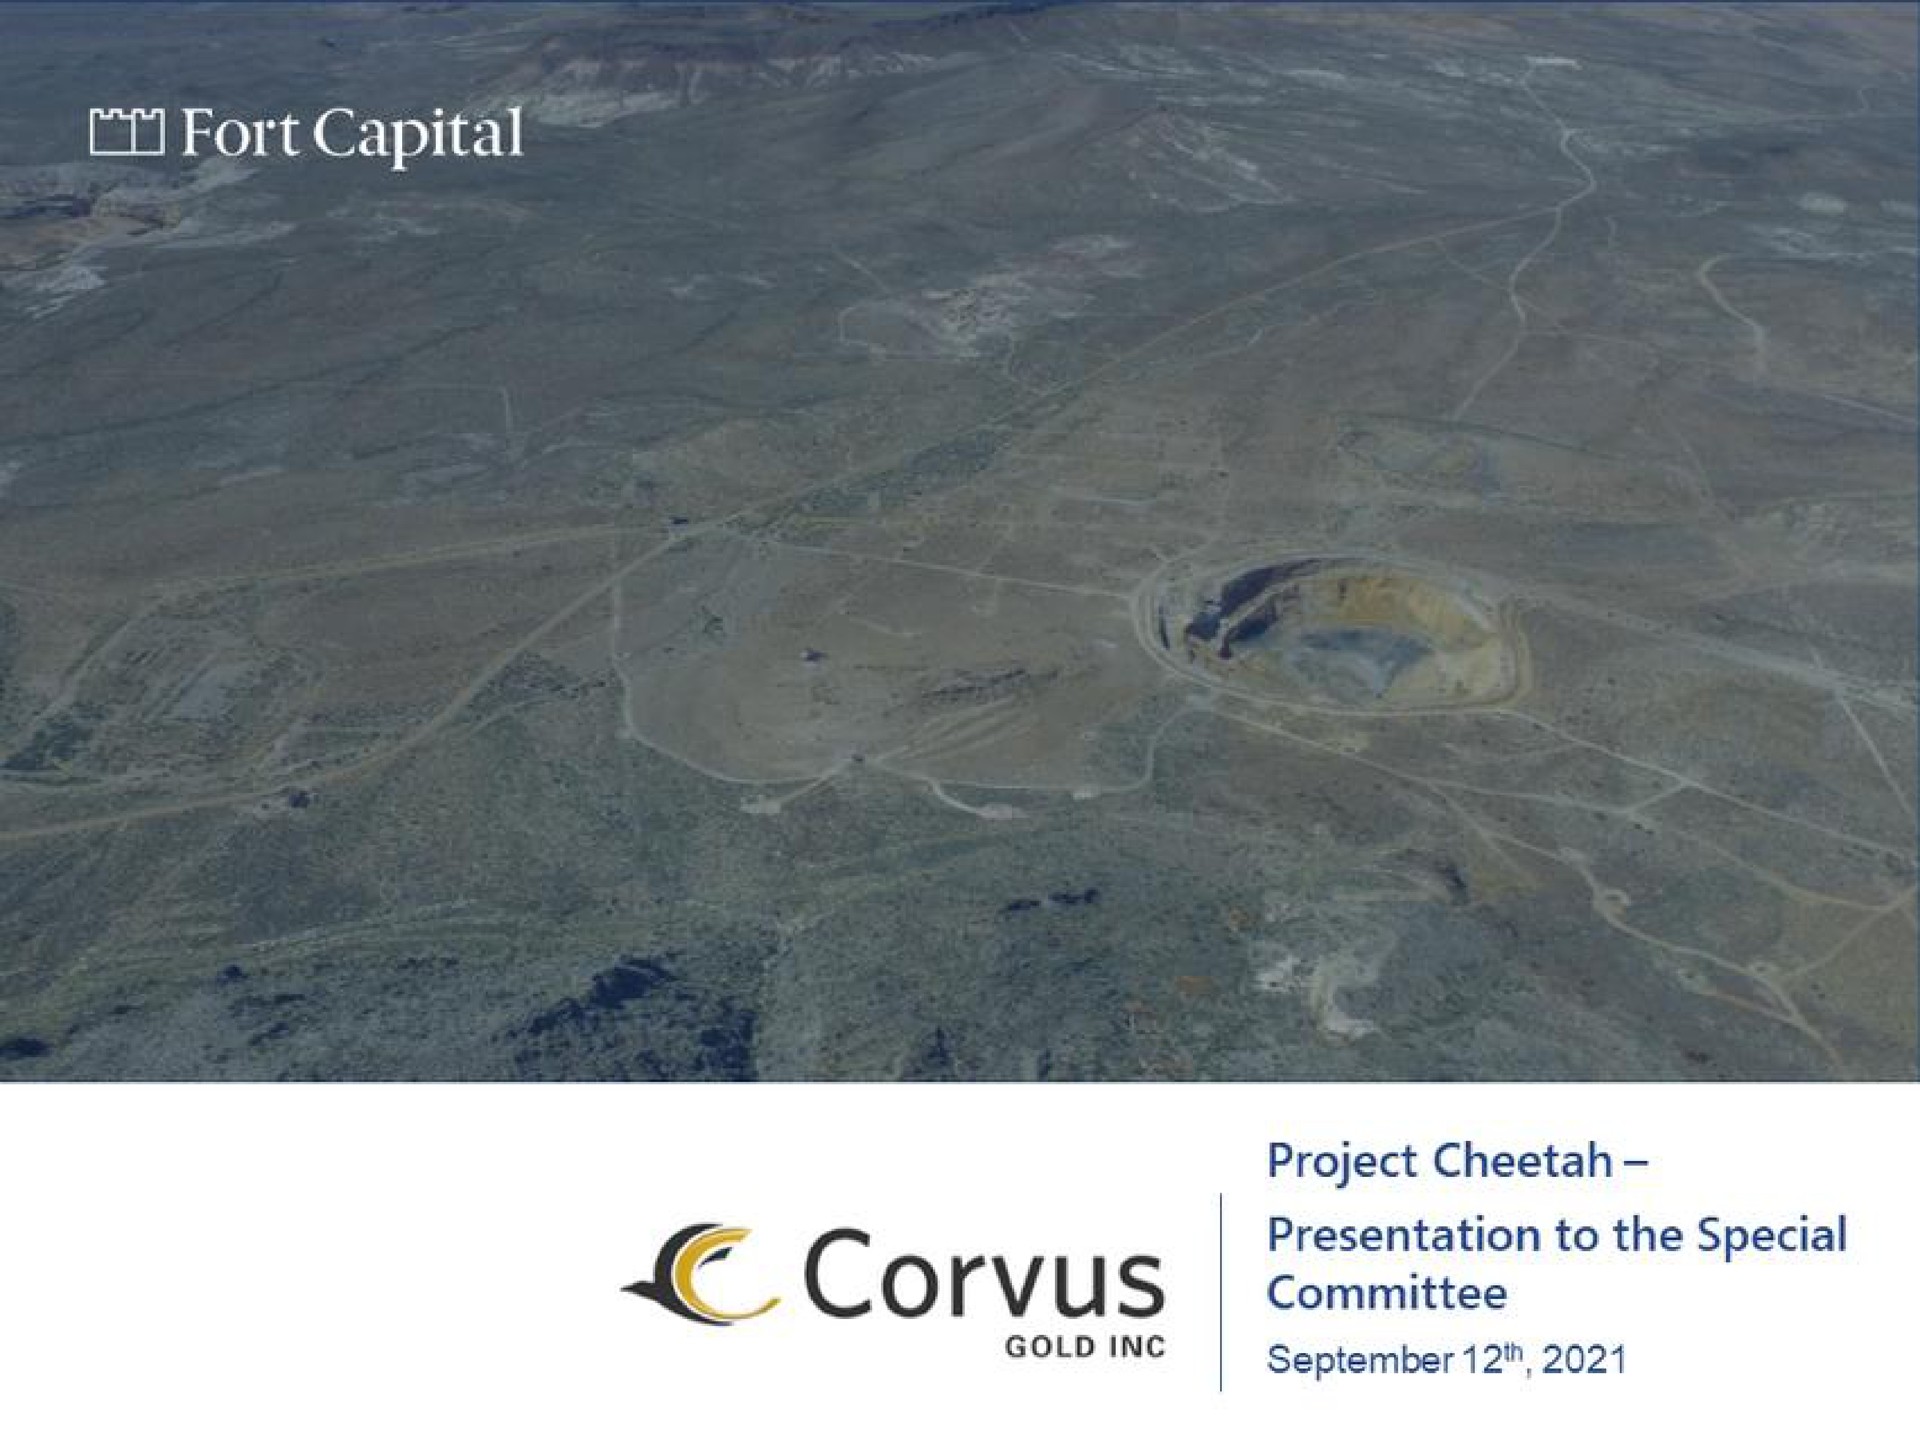 fort capital project cheetah presentation to the special committee | Fort Capital